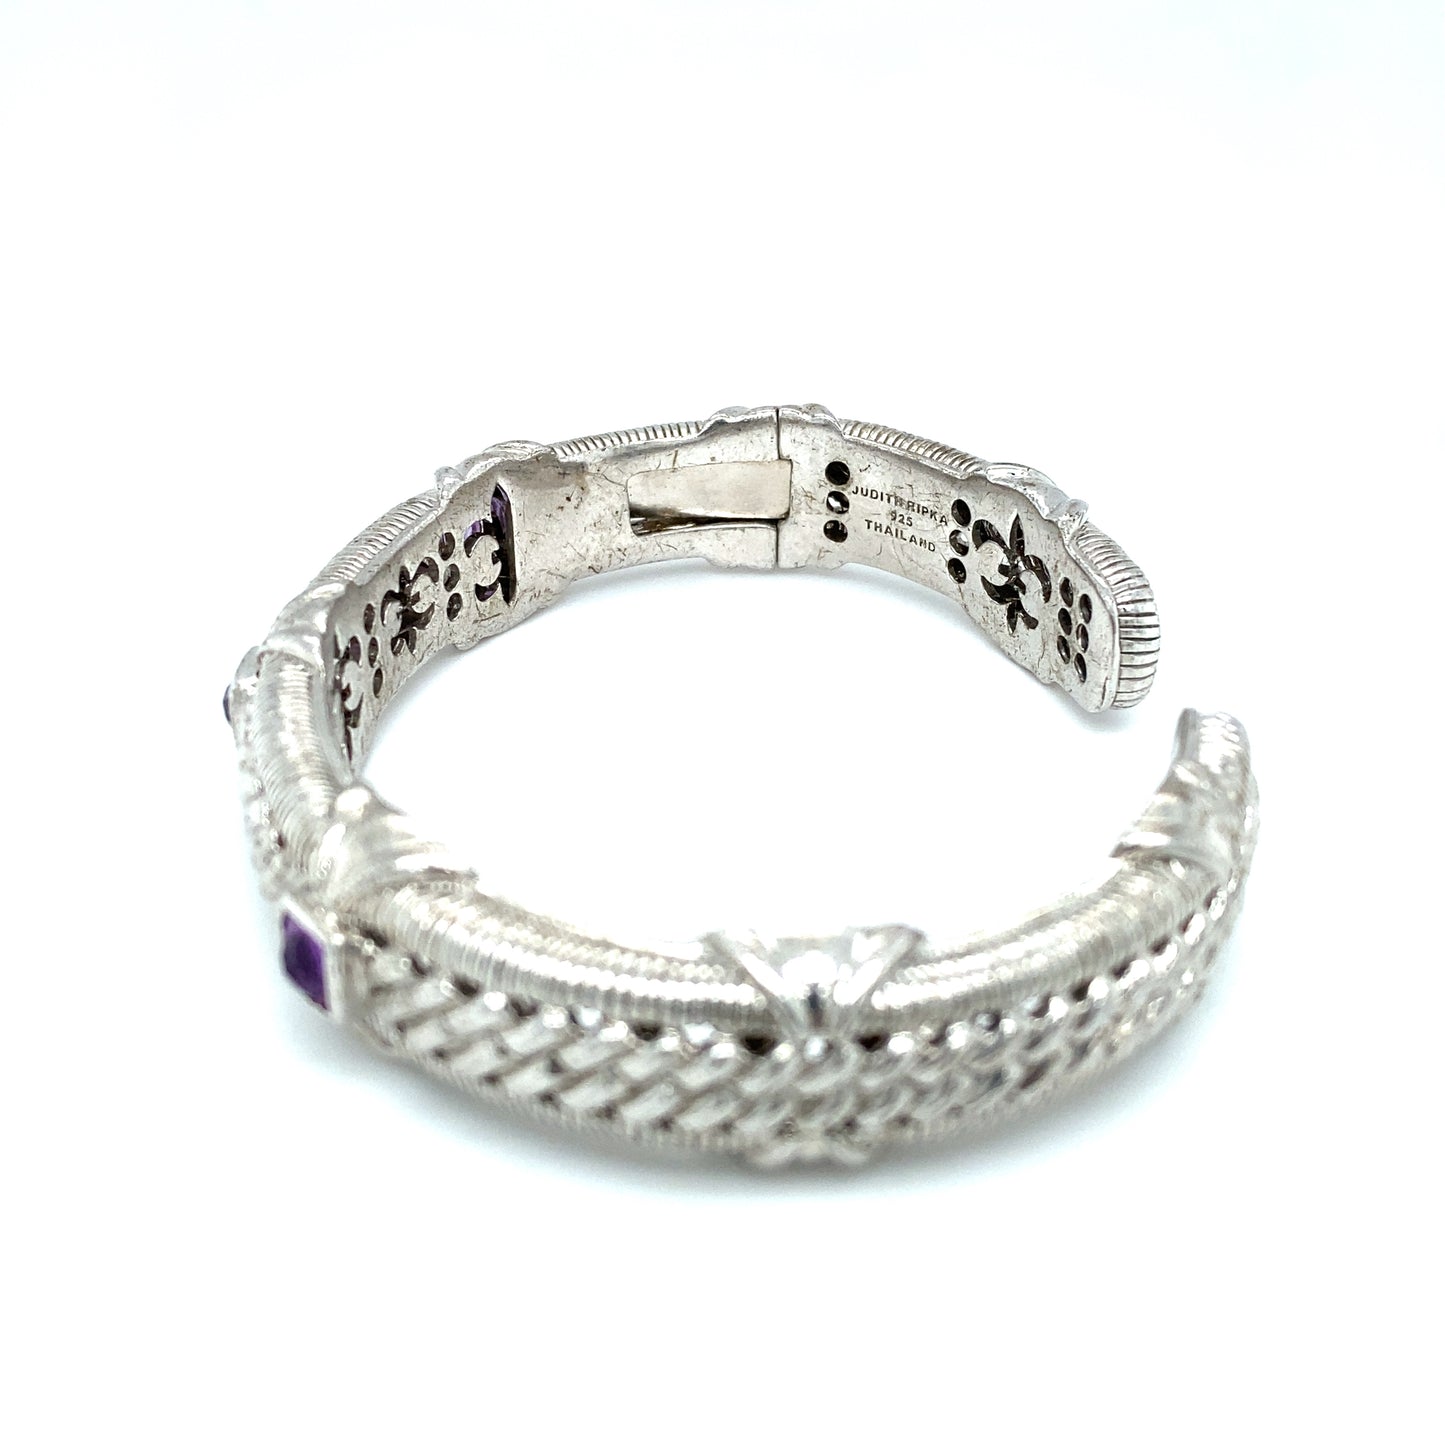 JUDITH RIPKA Hinged Cuff with Amethysts in Sterling Silver